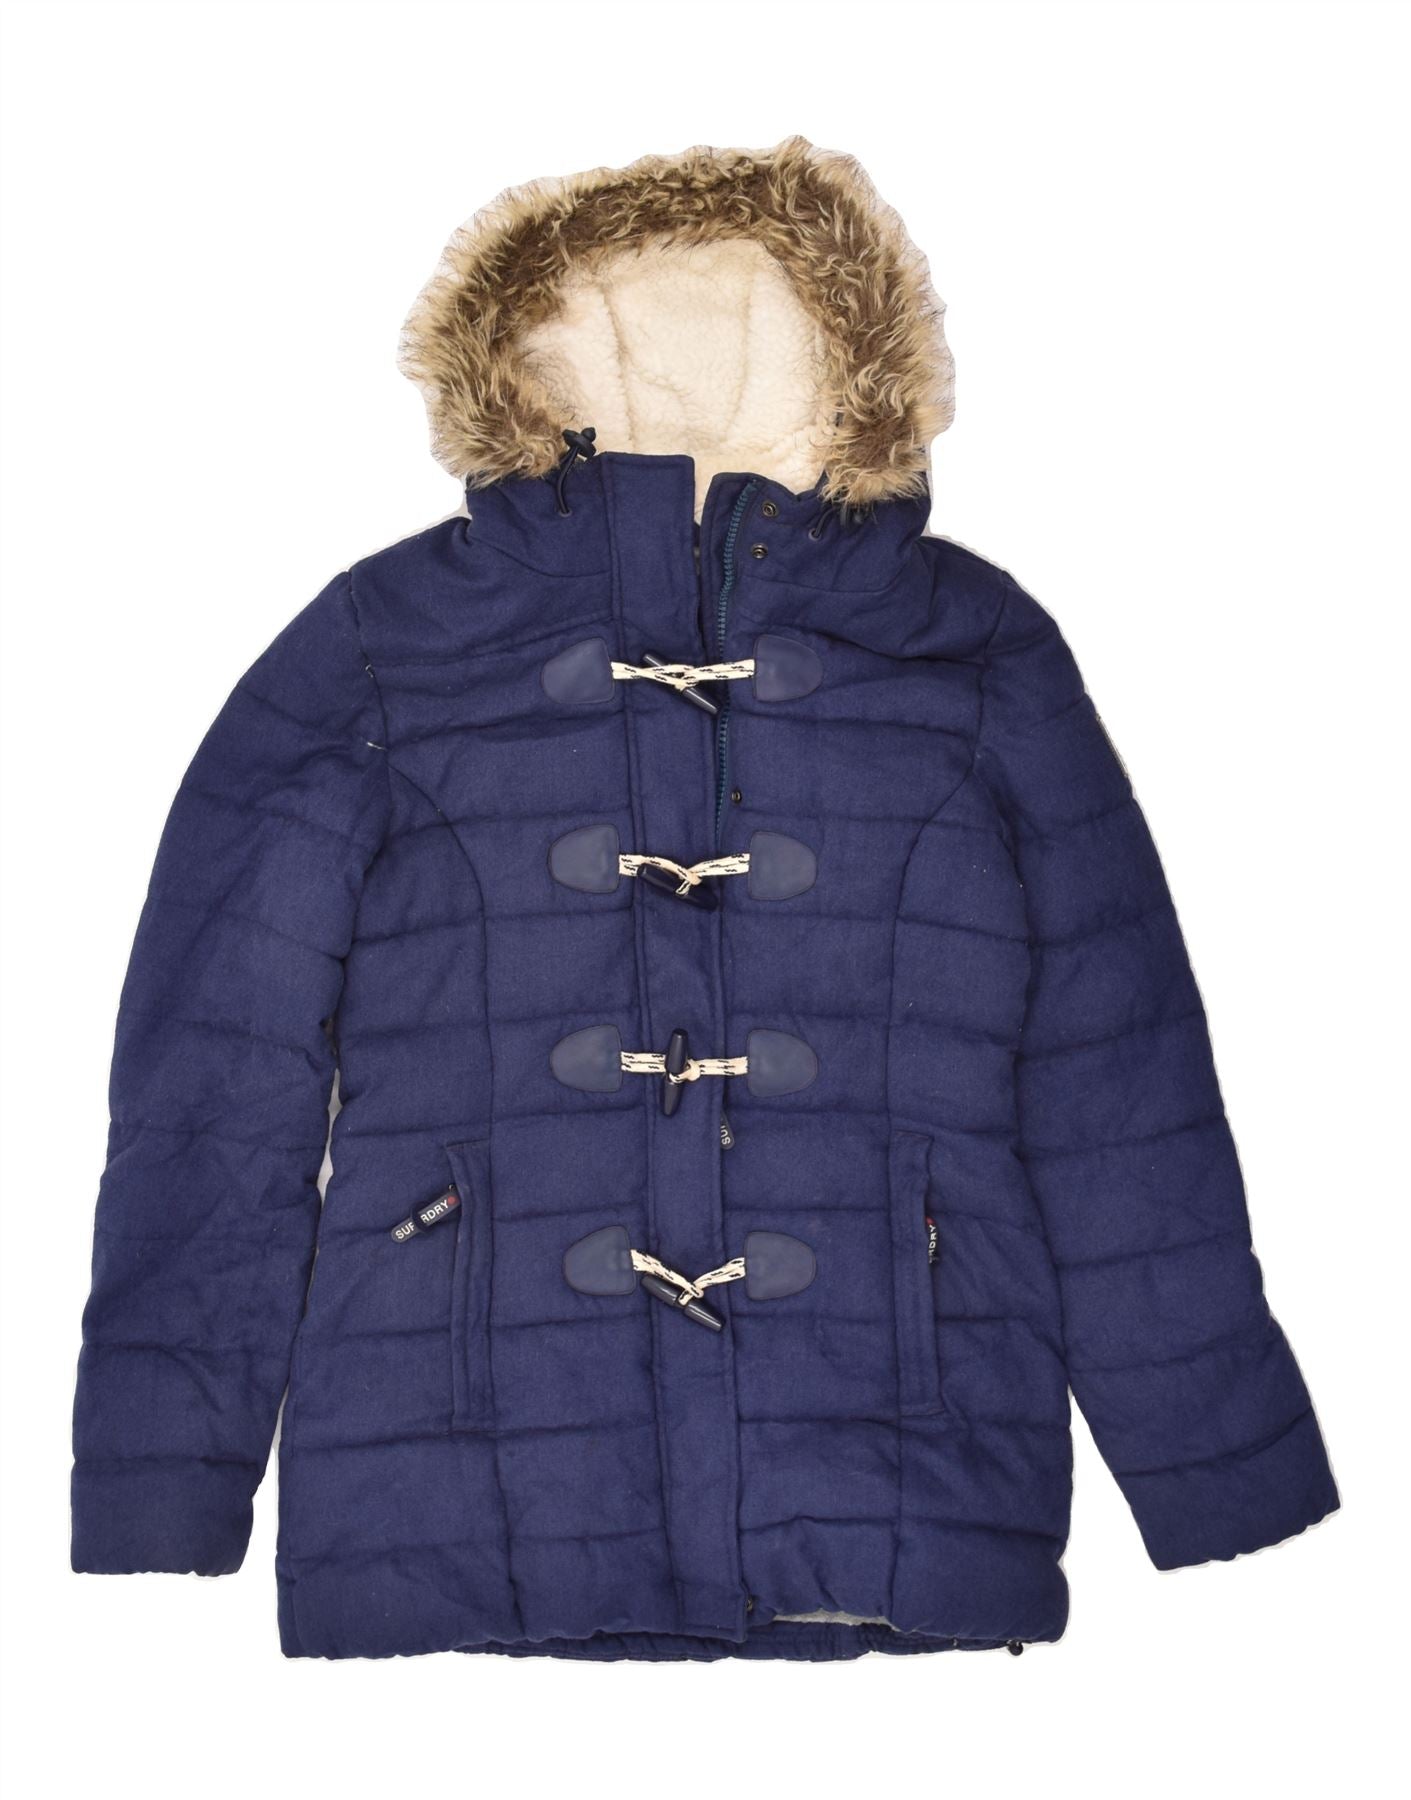 SUPERDRY Womens Hooded Padded Coat UK 10 Small Navy Blue, Vintage &  Second-Hand Clothing Online